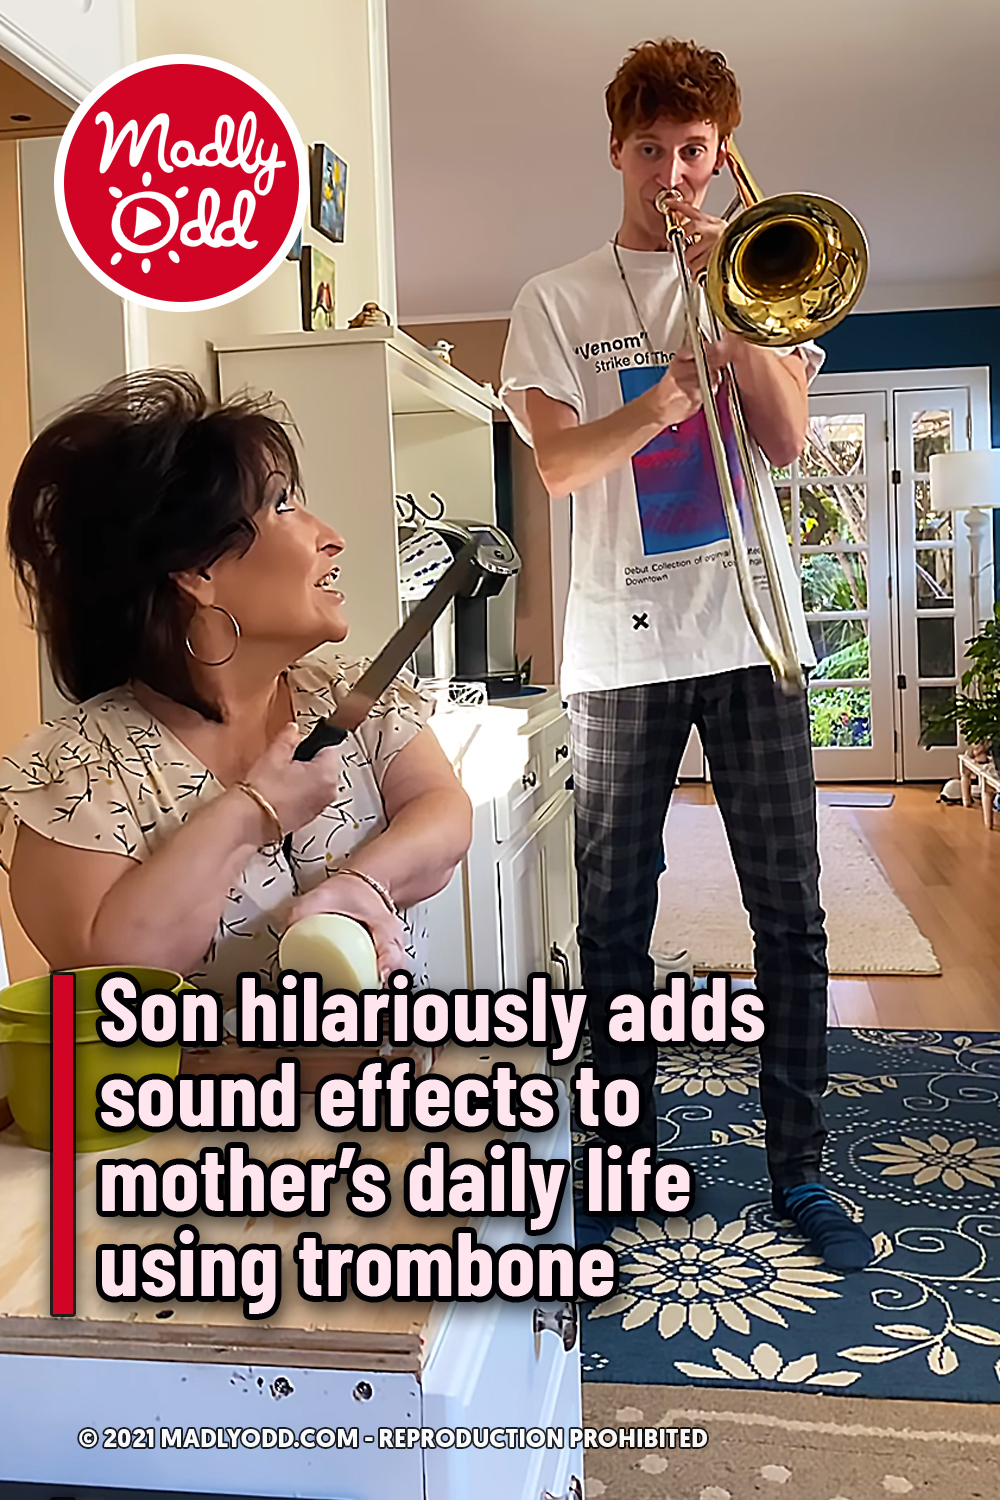 Son hilariously adds sound effects to mother’s daily life using trombone